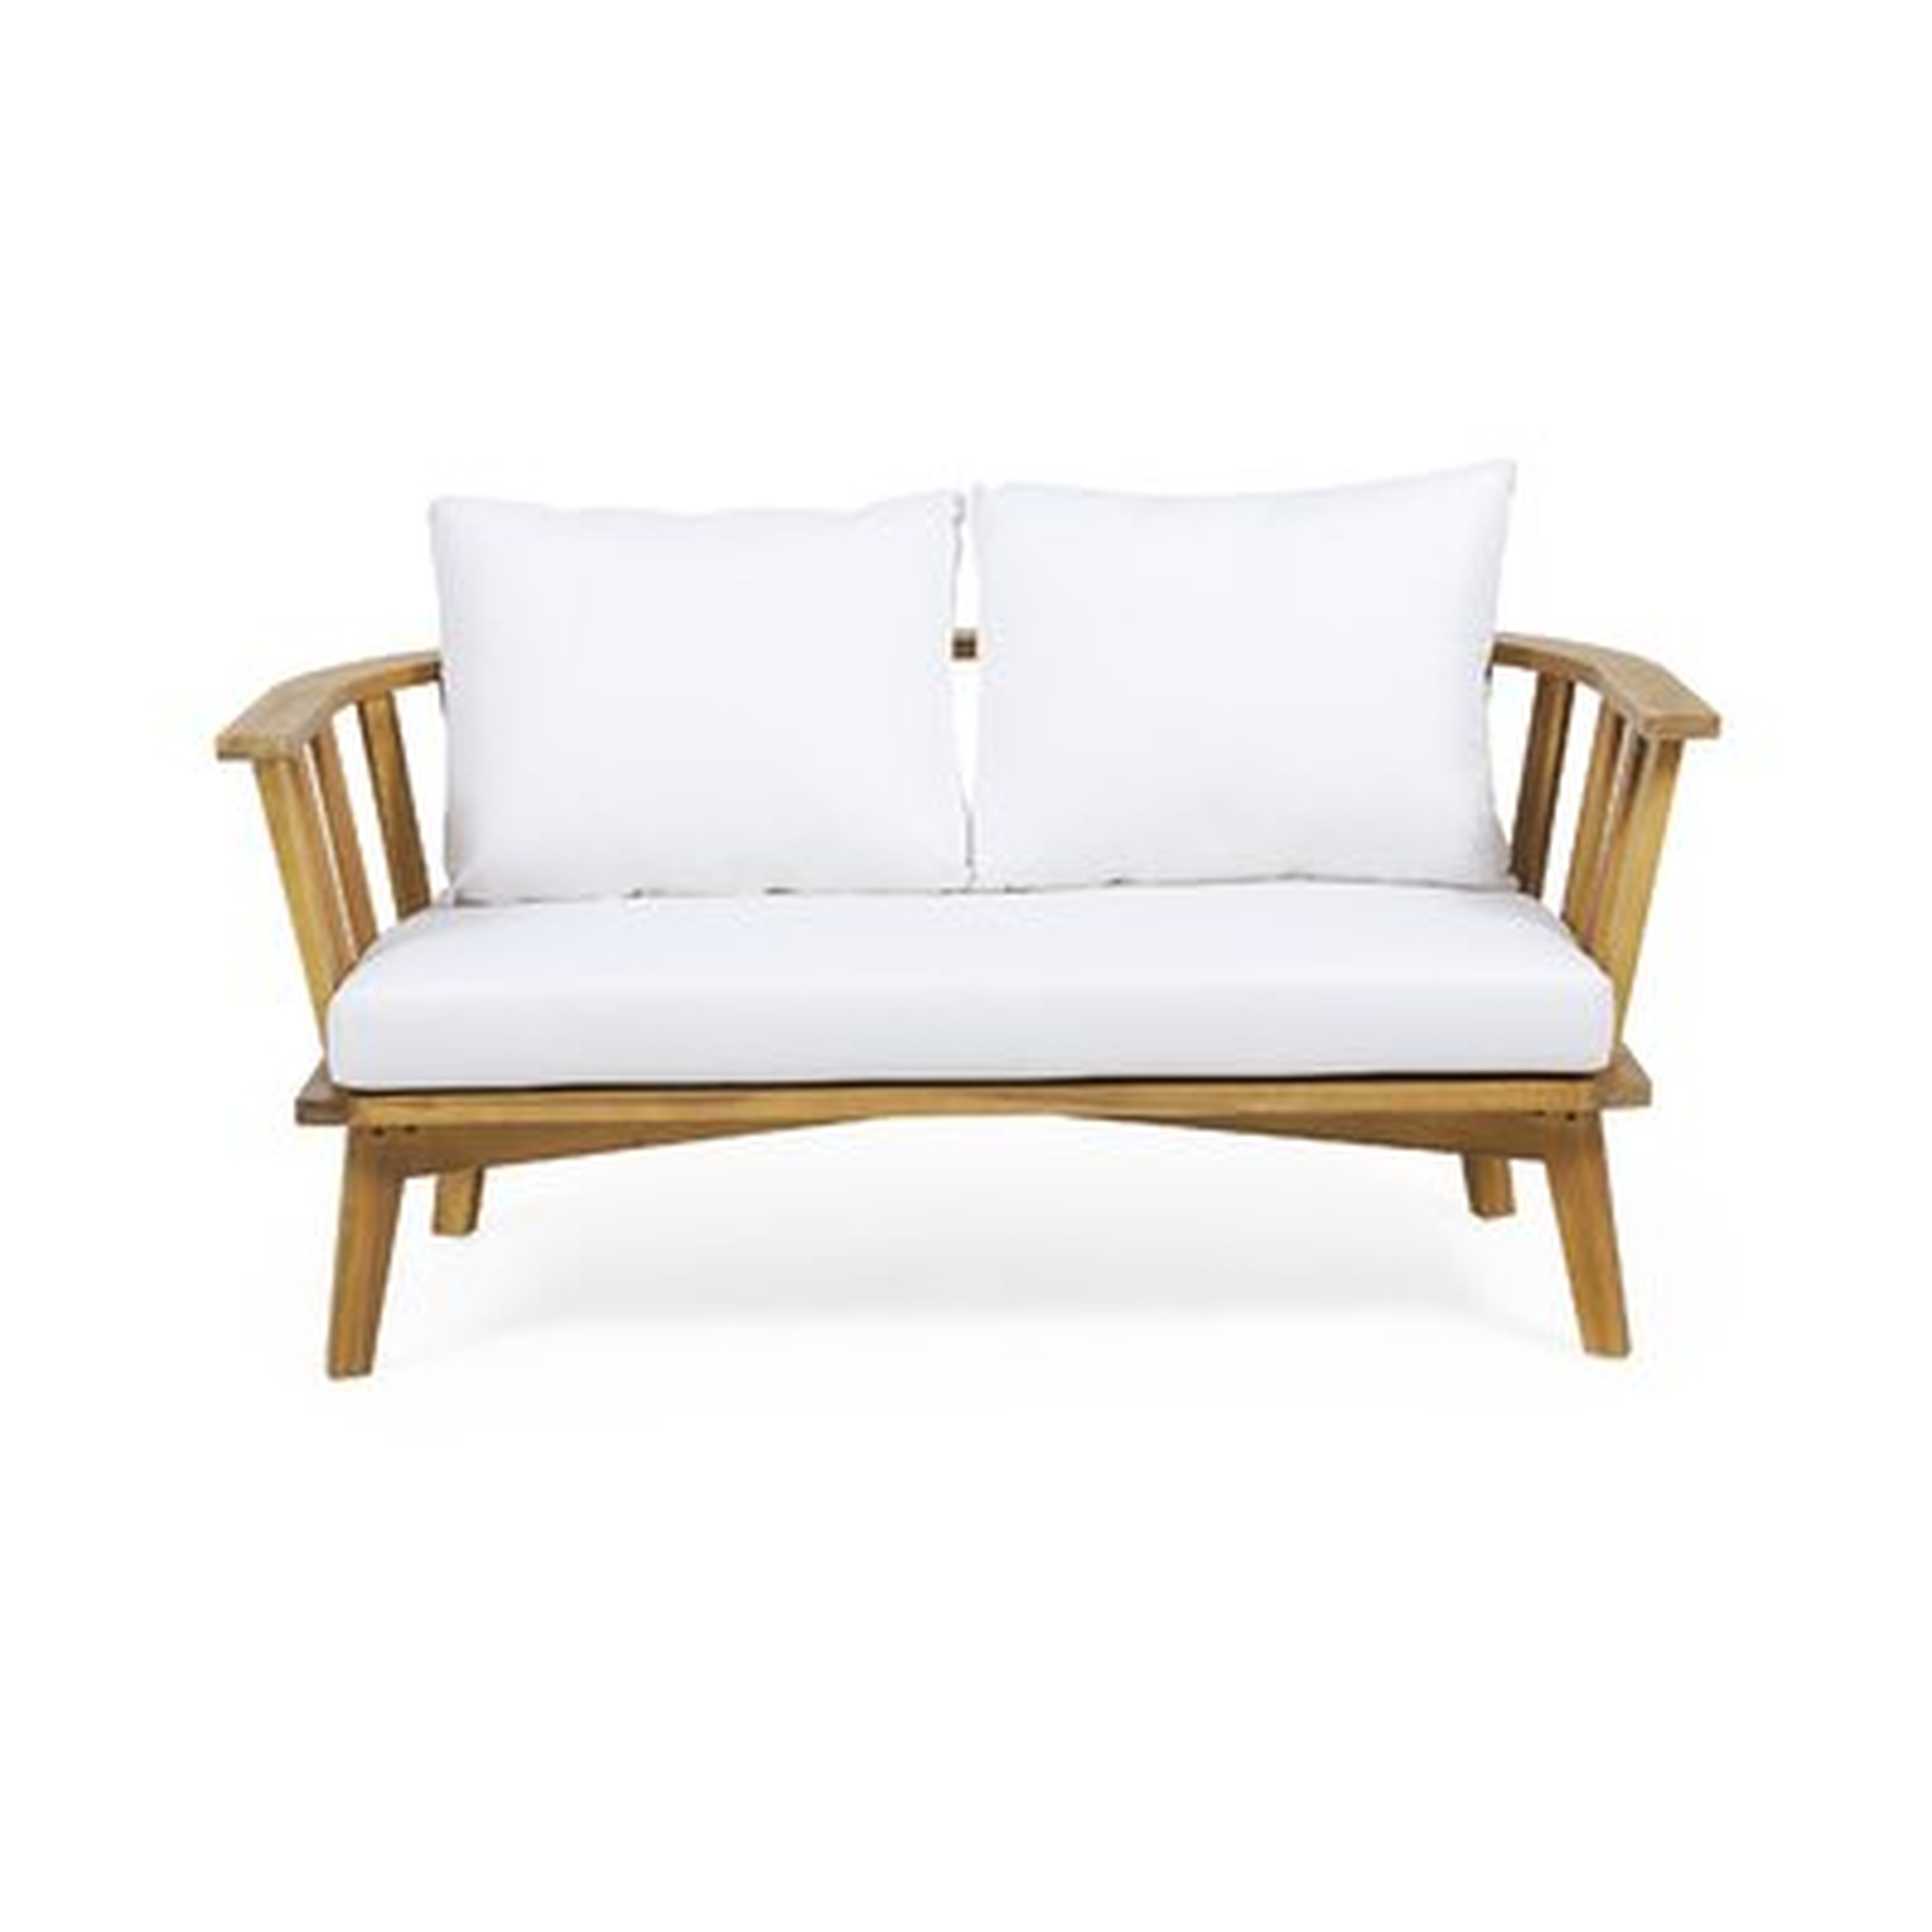 Outdoor Wooden Loveseat With Cushions - Wayfair